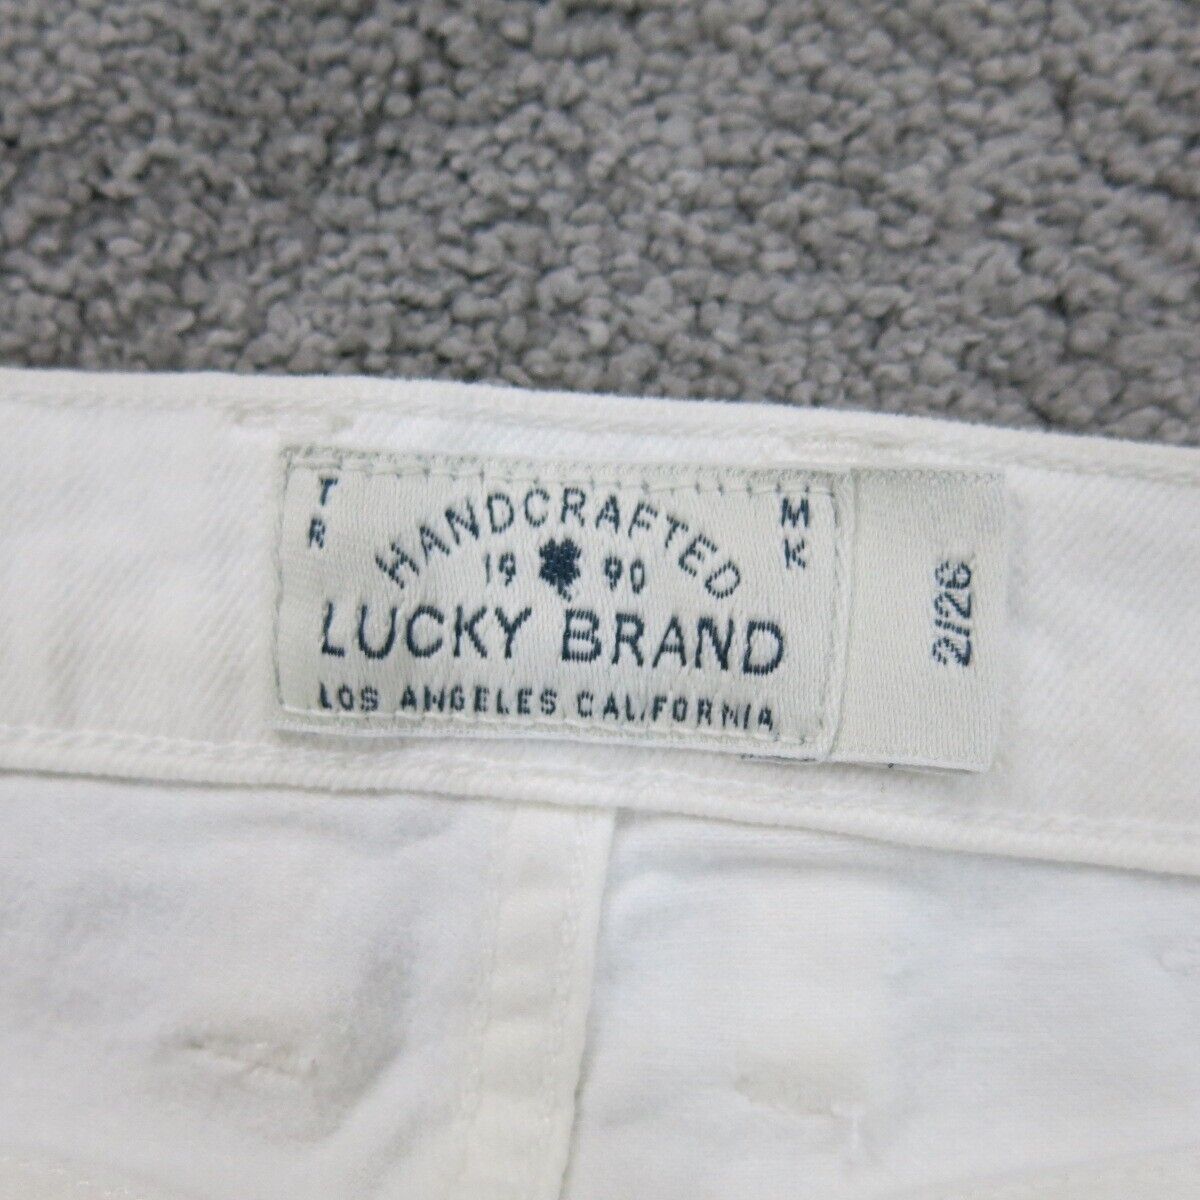 Lucky Brand Cut-Off Shorts Size 2/26